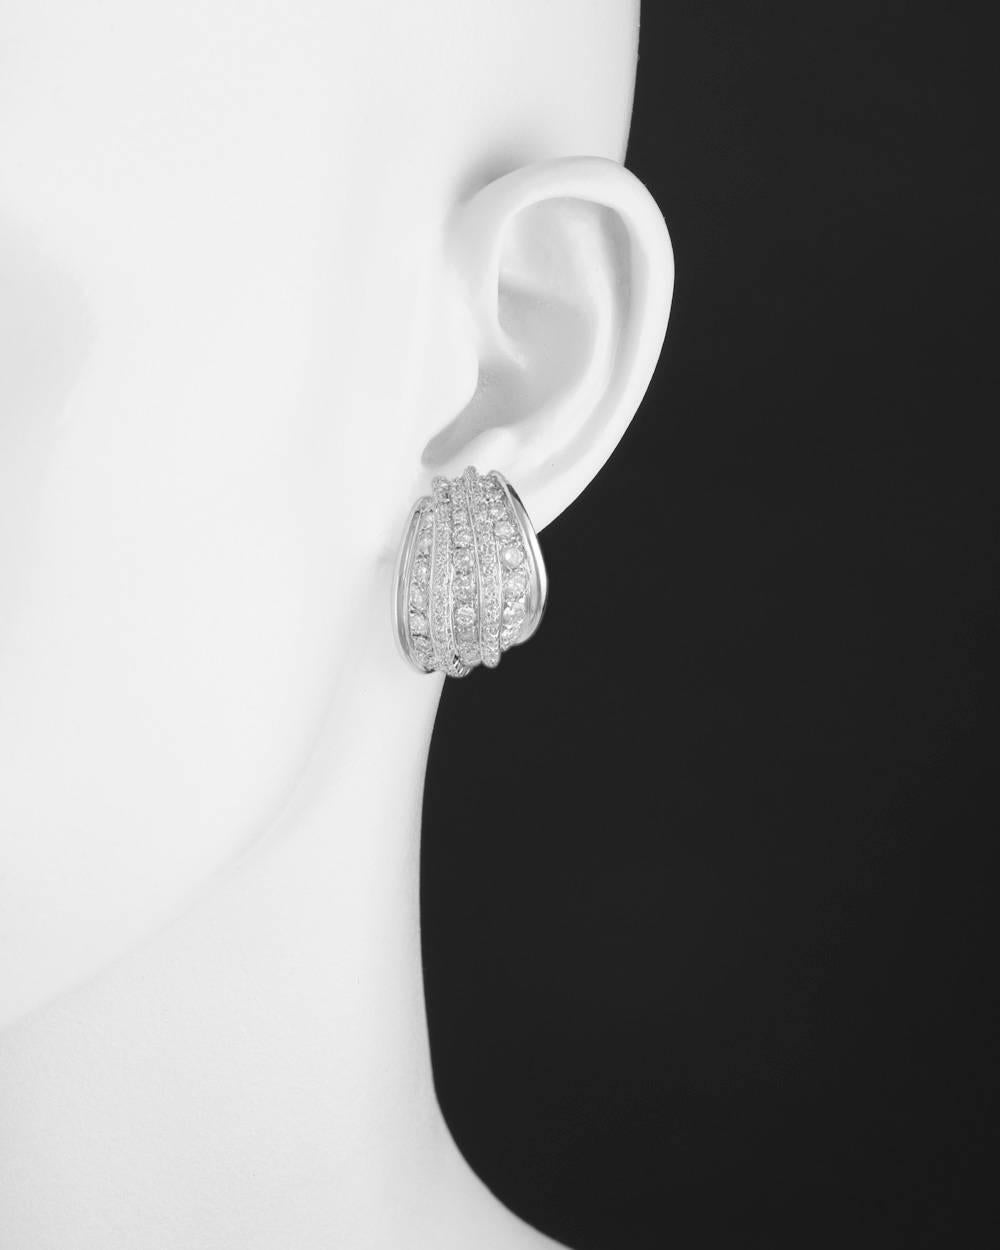 Five-row diamond earclips, designed with three rows of graduated larger round diamonds separated by two rows of smaller round diamonds, the diamonds altogether weighing approximately 3.60 total carats, mounted in 18k white gold, with clips and